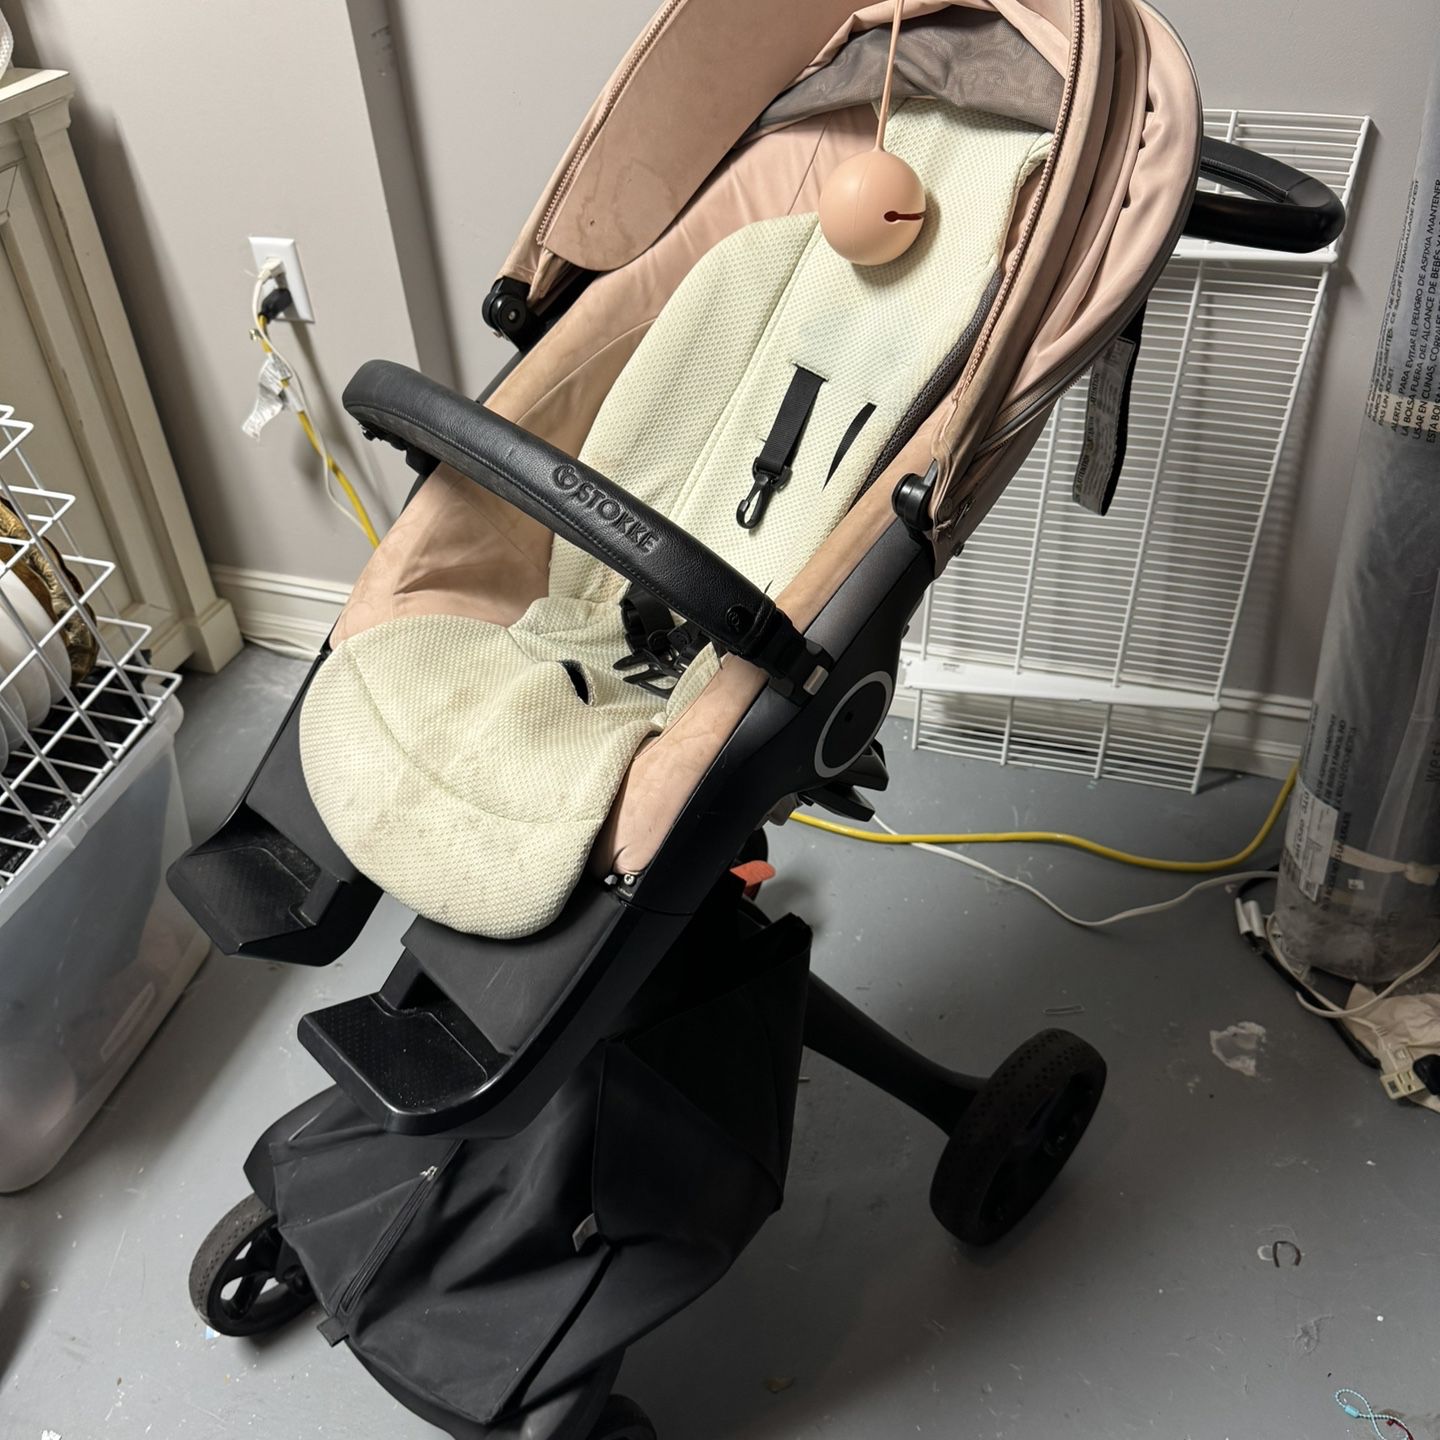 Special edition Stokke Xplory - Stokke Travel Bag & New Matching Diaper Bag  Also Available 